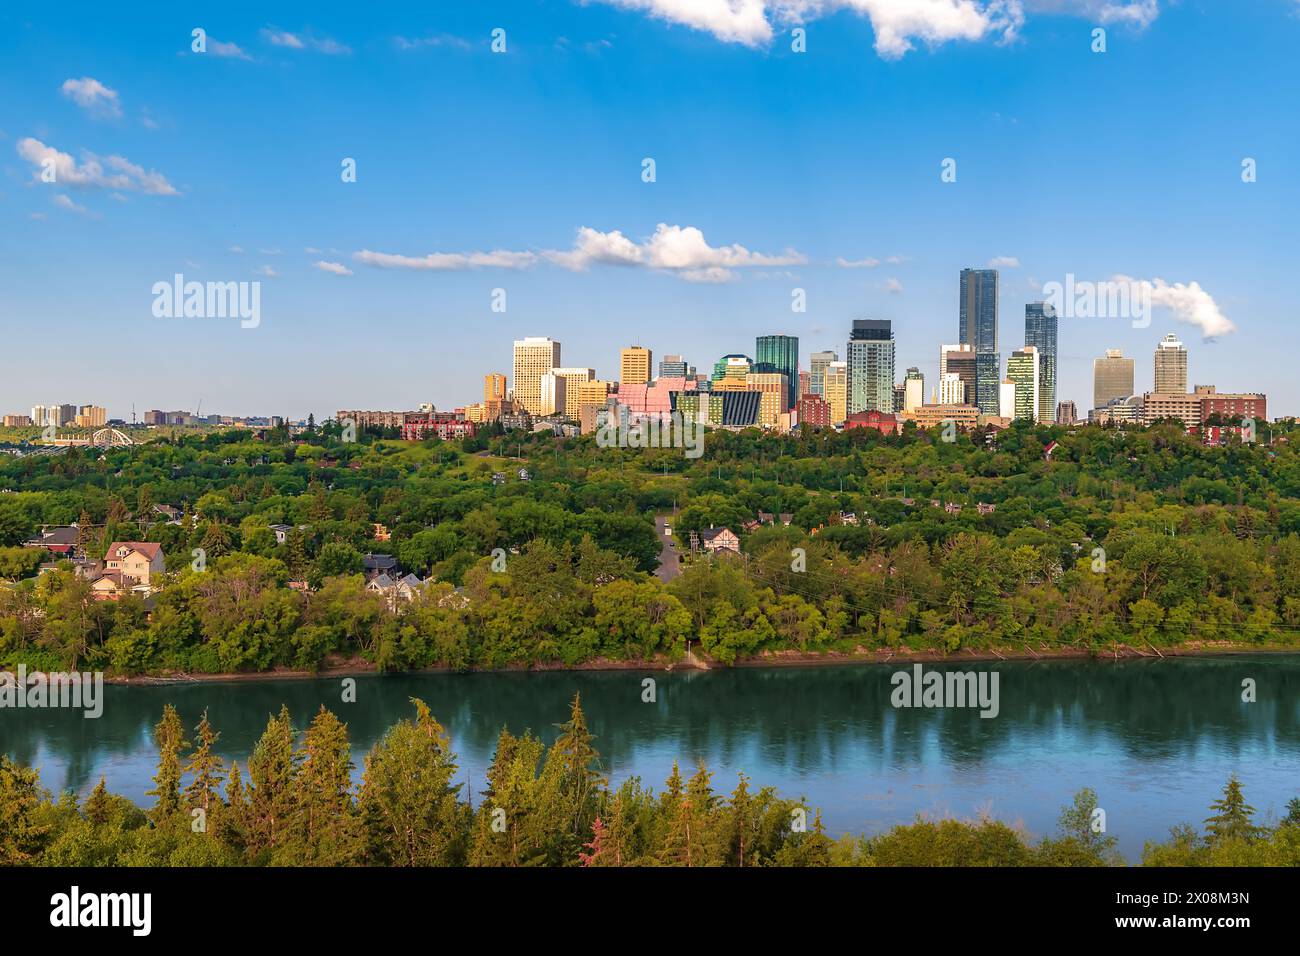 anoramic Blue Sky Over The Edmonton Skyline And River Valley Stock Photo